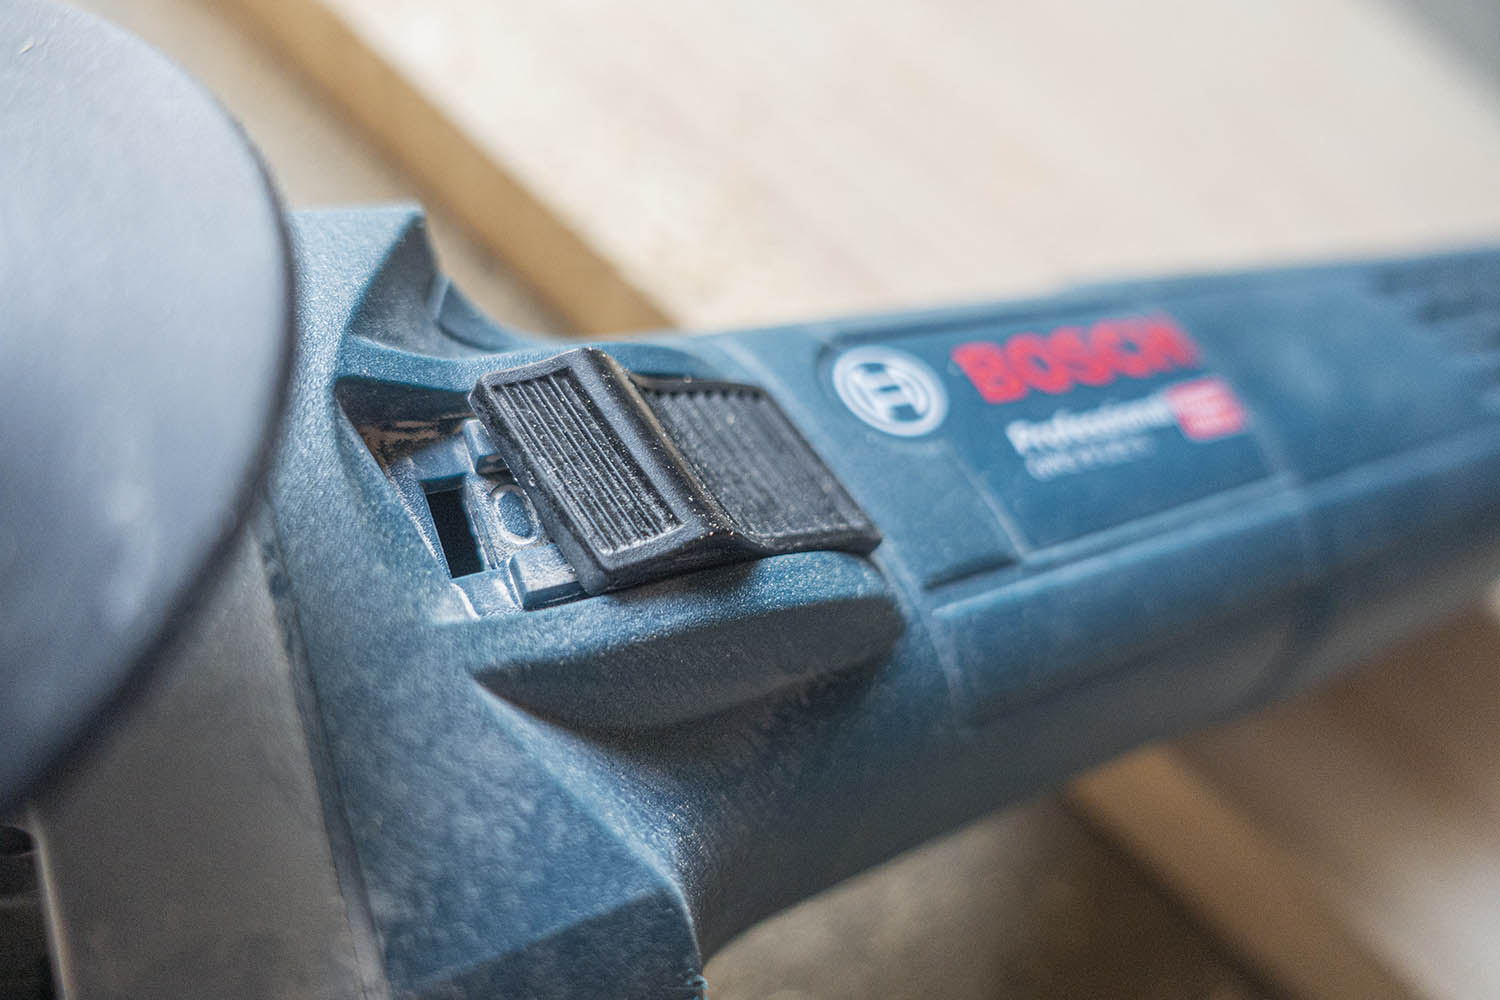 GWS 9-125 S Bosch PRO review